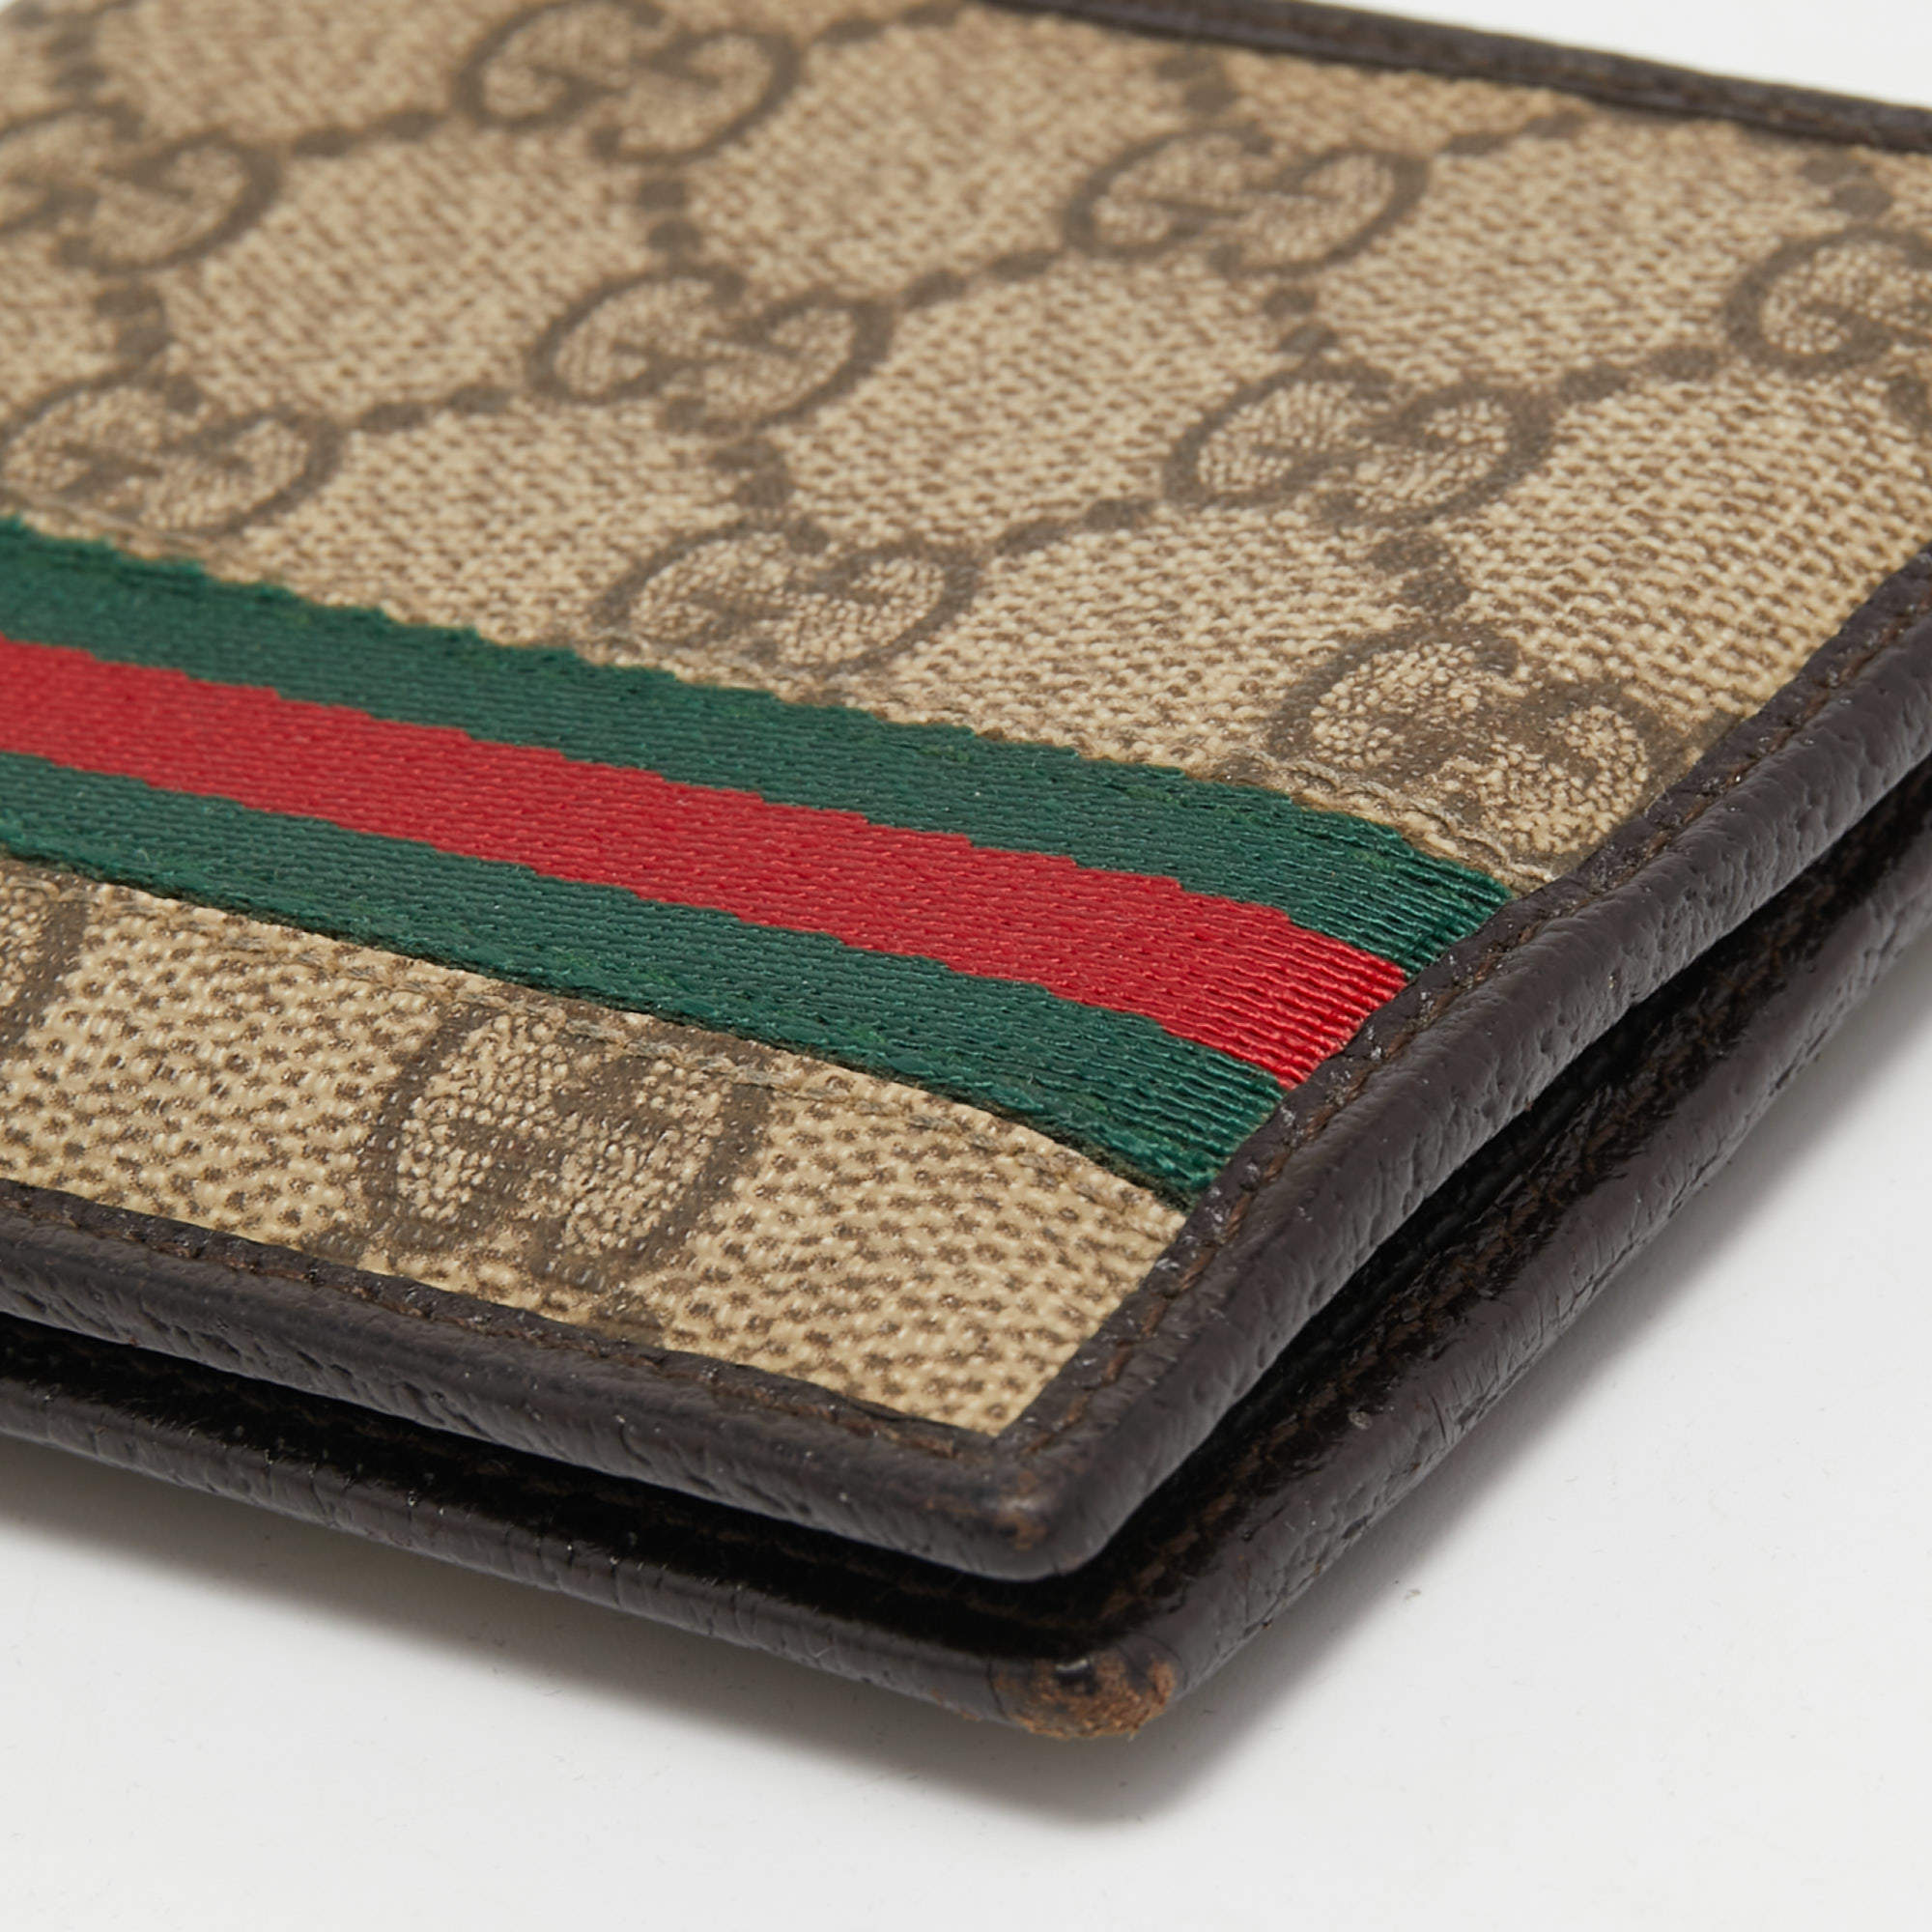 Gucci, Bags, Gucci Leather Web Bifold Wallet Lnwot